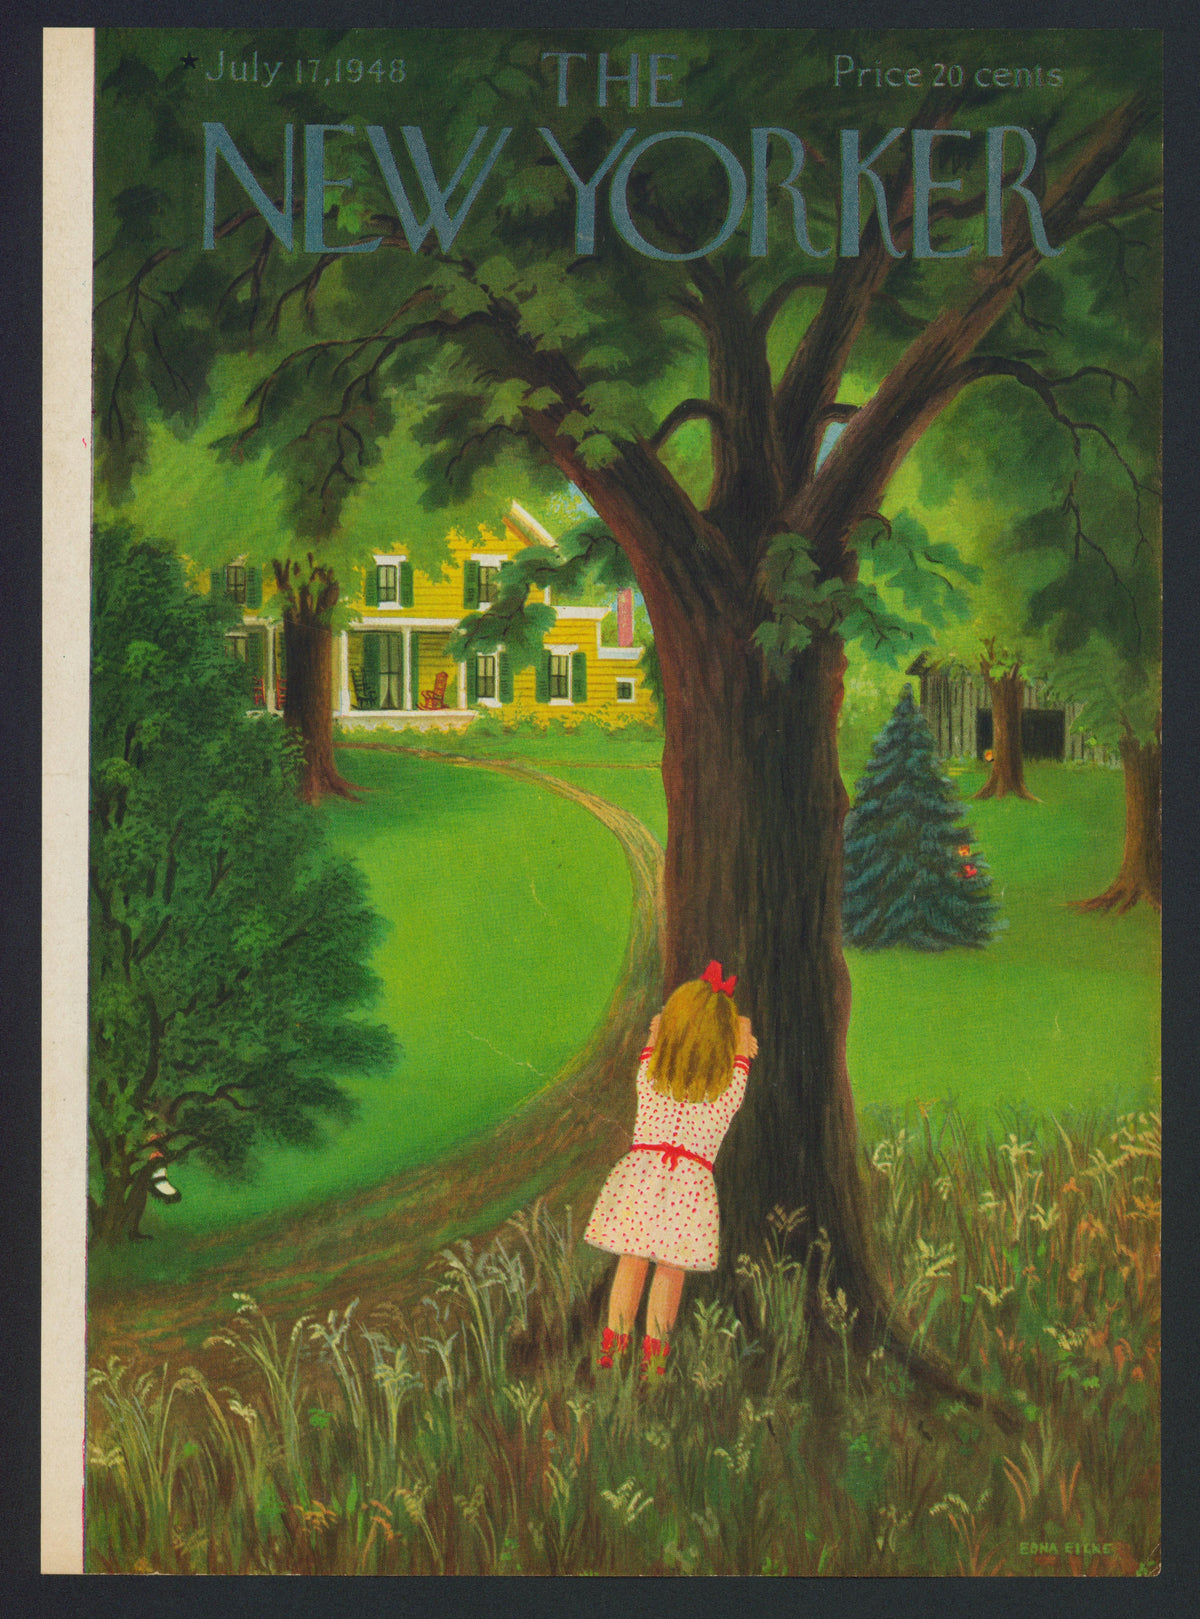 Hide and Seek - The New Yorker - Authentic Vintage Antique Print